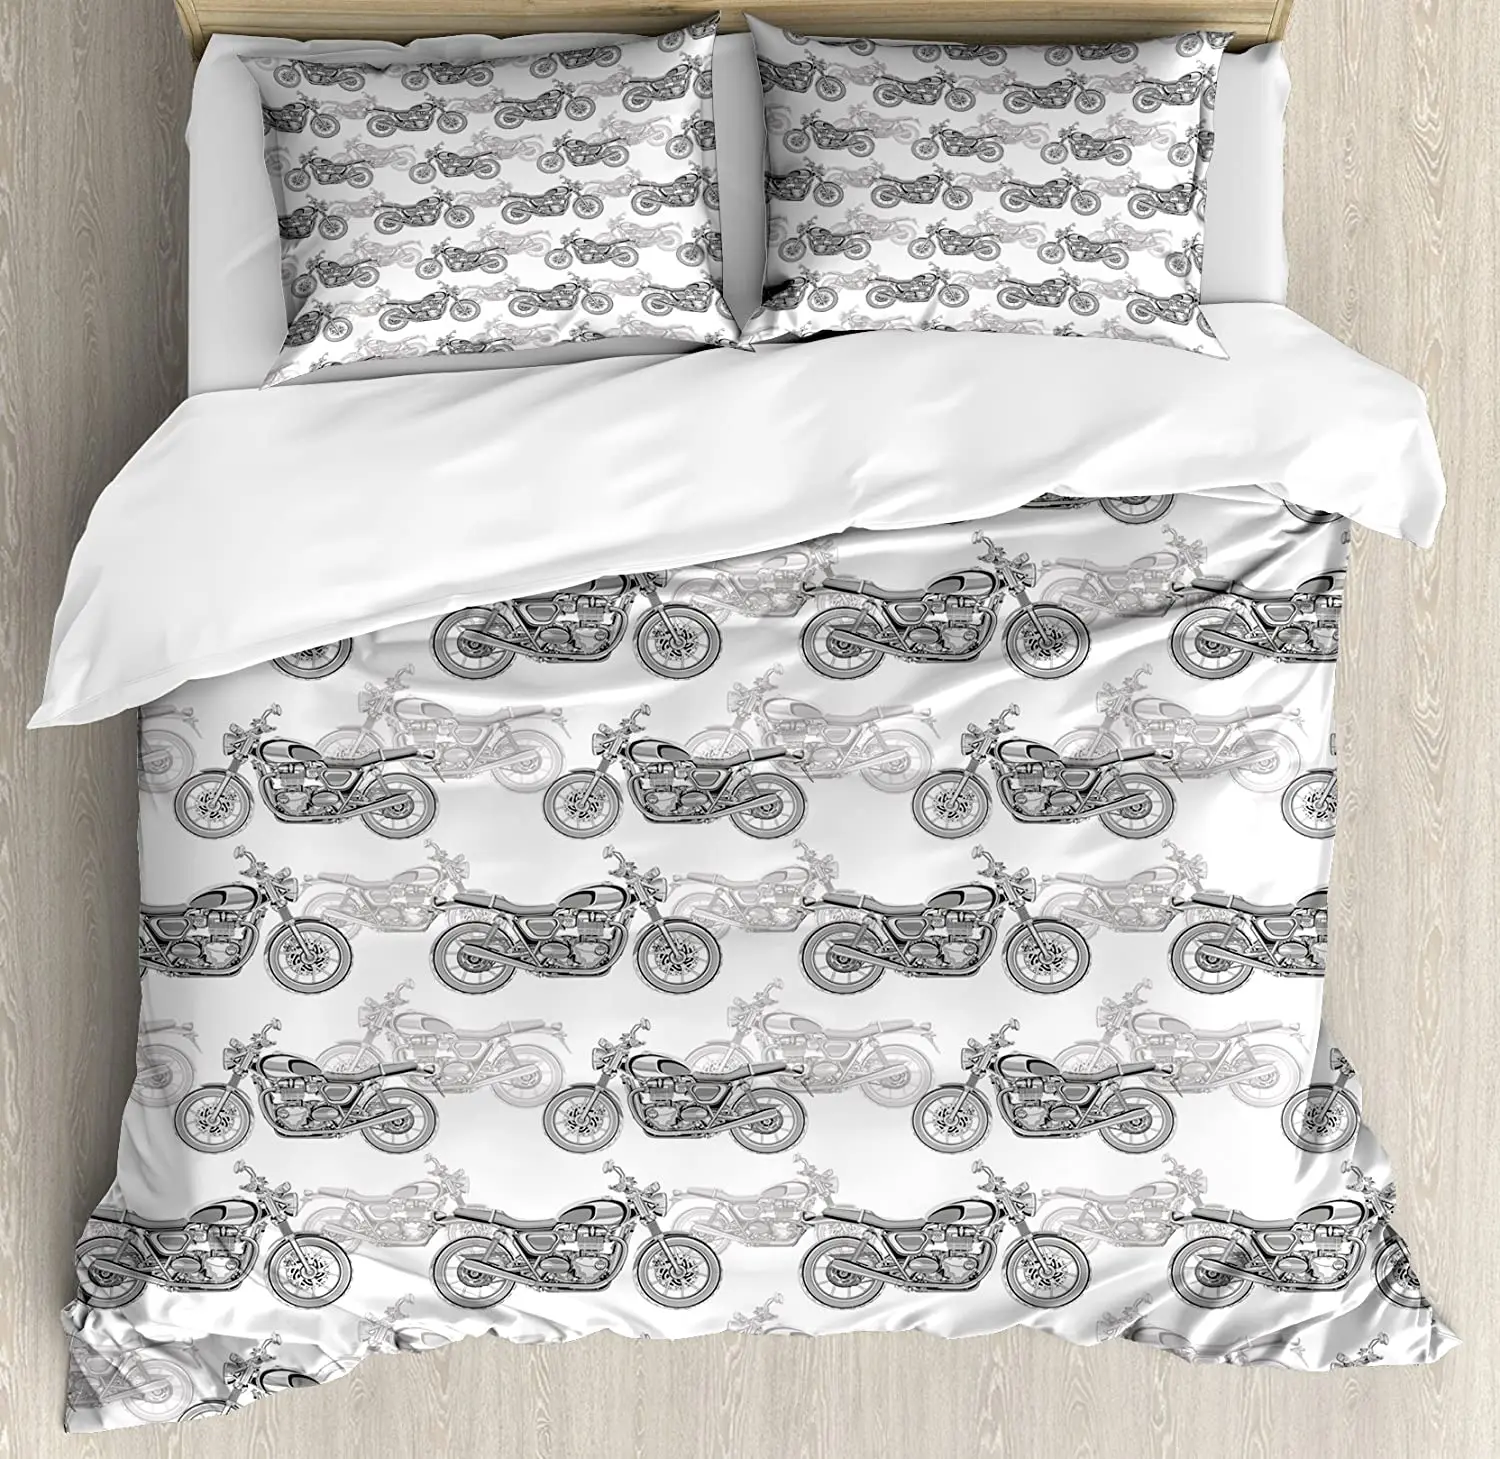 

Motorcycle Bedding Set For Bedroom Bed Home Realistic Grayscale Illustration of Classic Mo Duvet Cover Quilt Cover Pillowcase